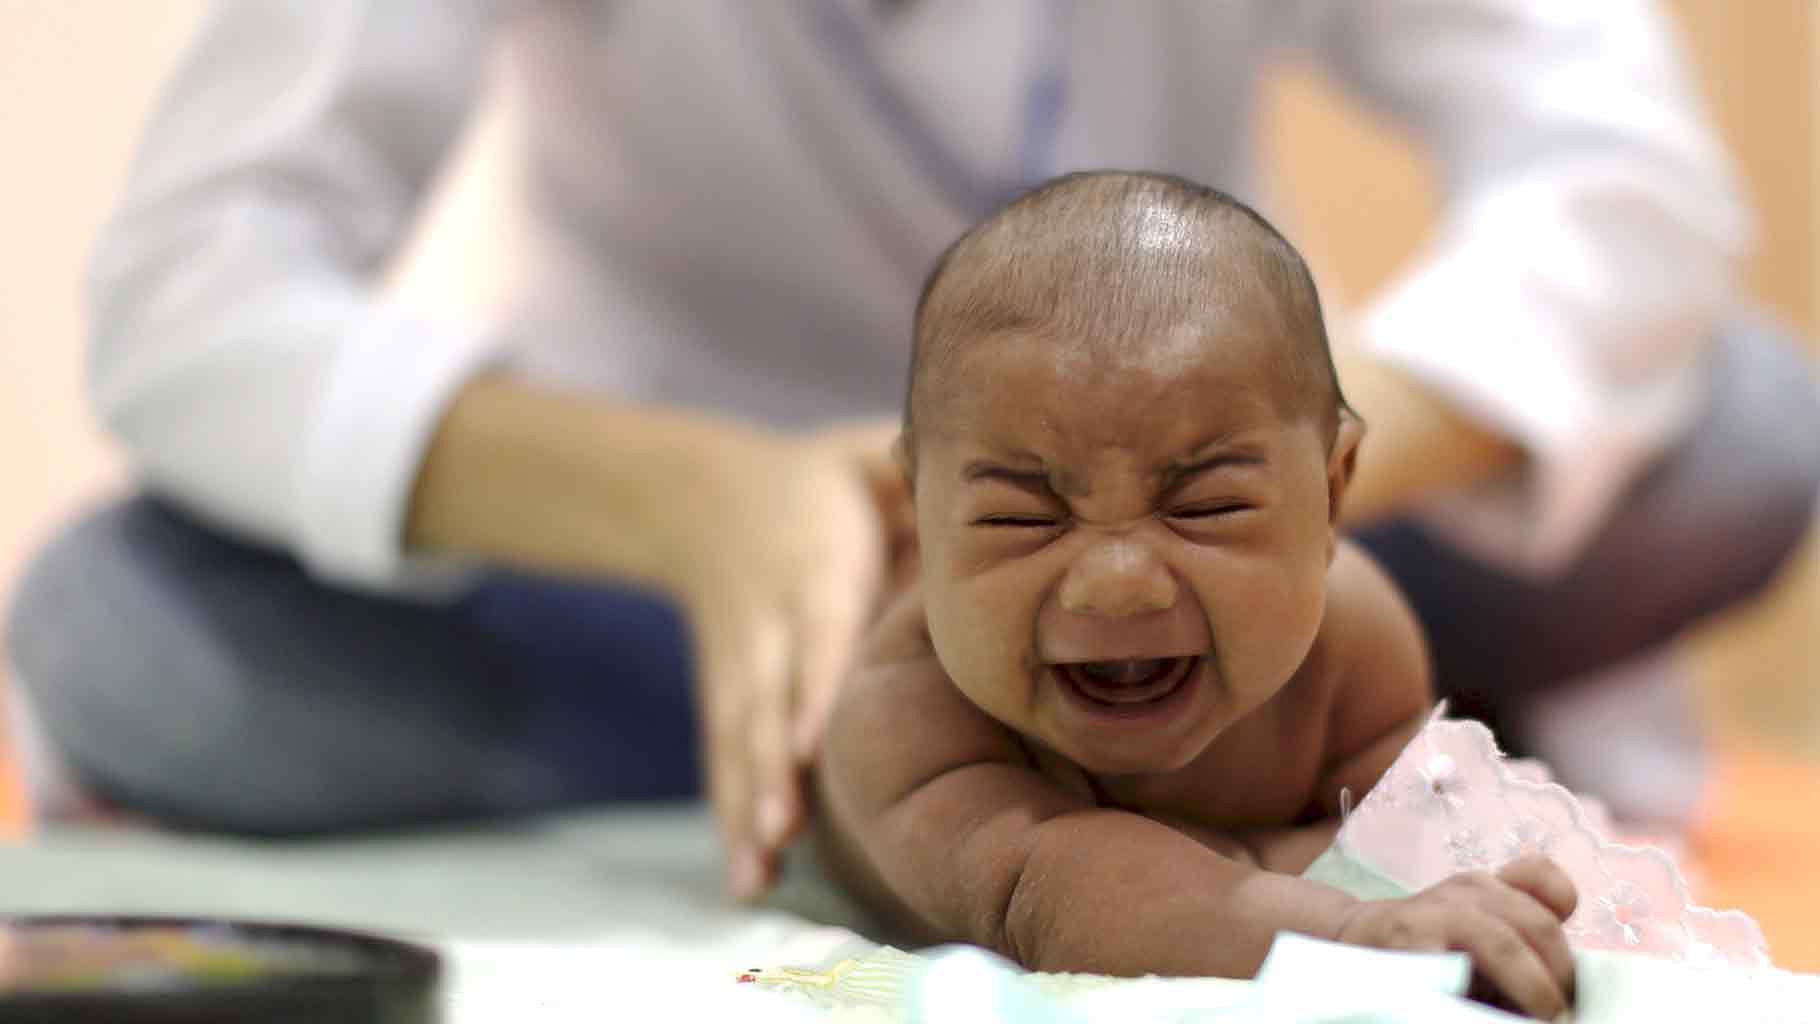 The Zika virus, a mosquito-borne disease suspected of causing serious birth defects, has spread to China for the first time (Photo: Reuters)